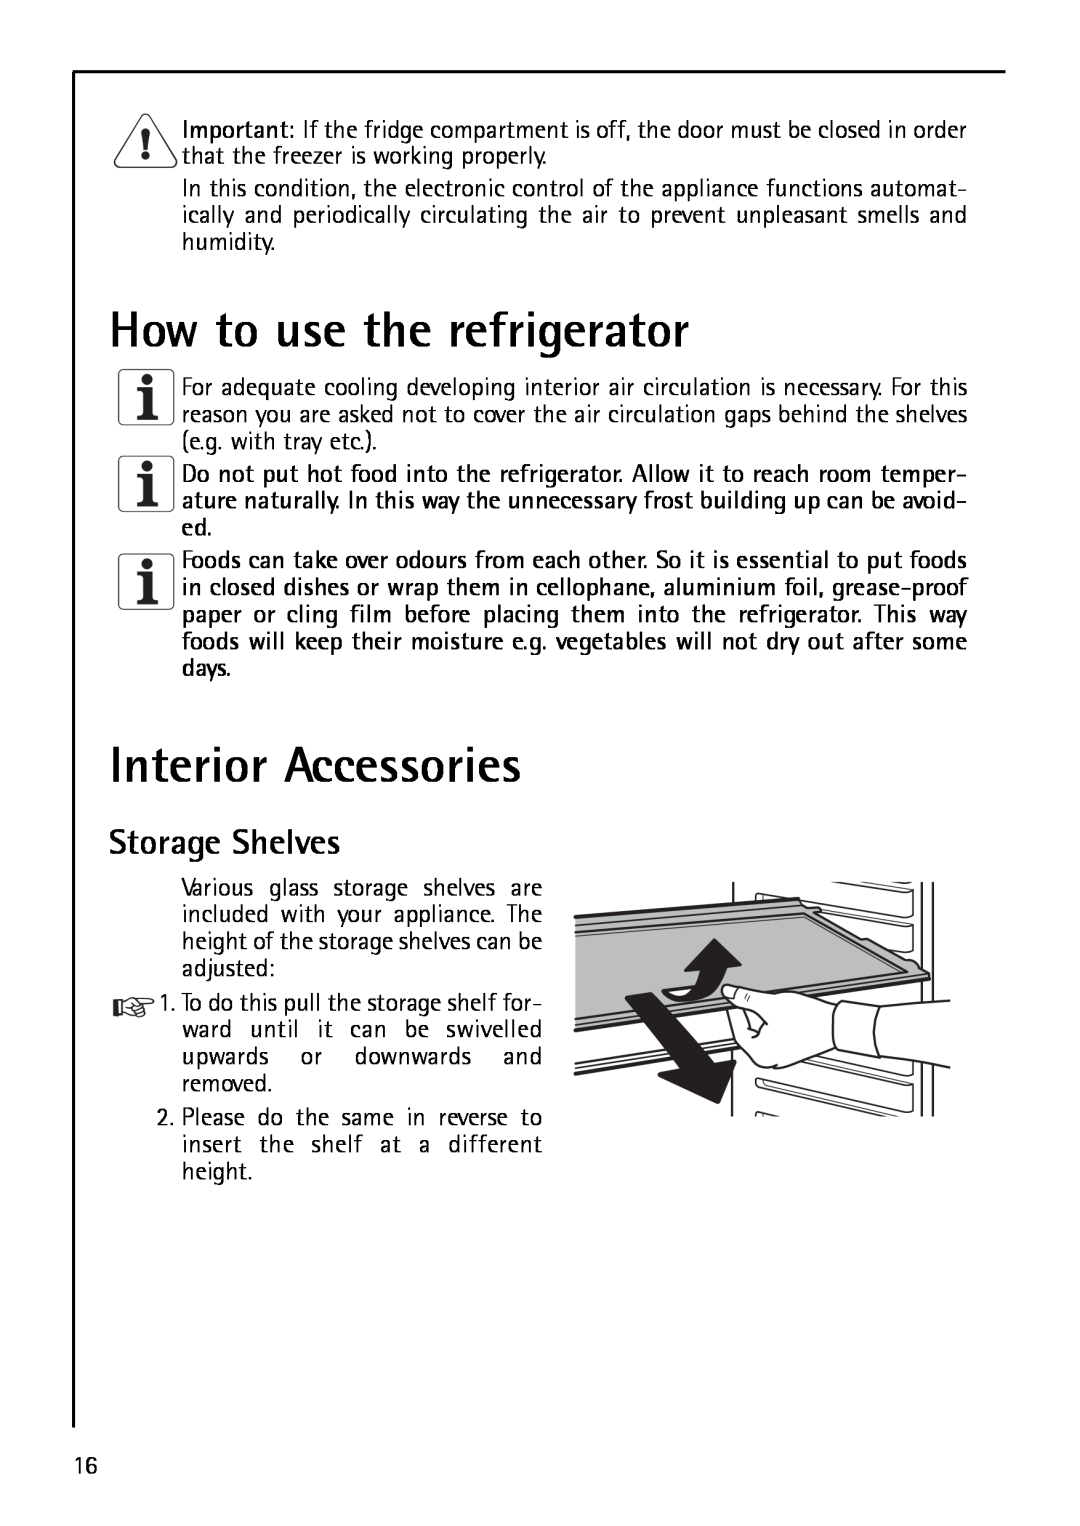 Electrolux S 75408 KG3 manual How to use the refrigerator, Interior Accessories, Storage Shelves 